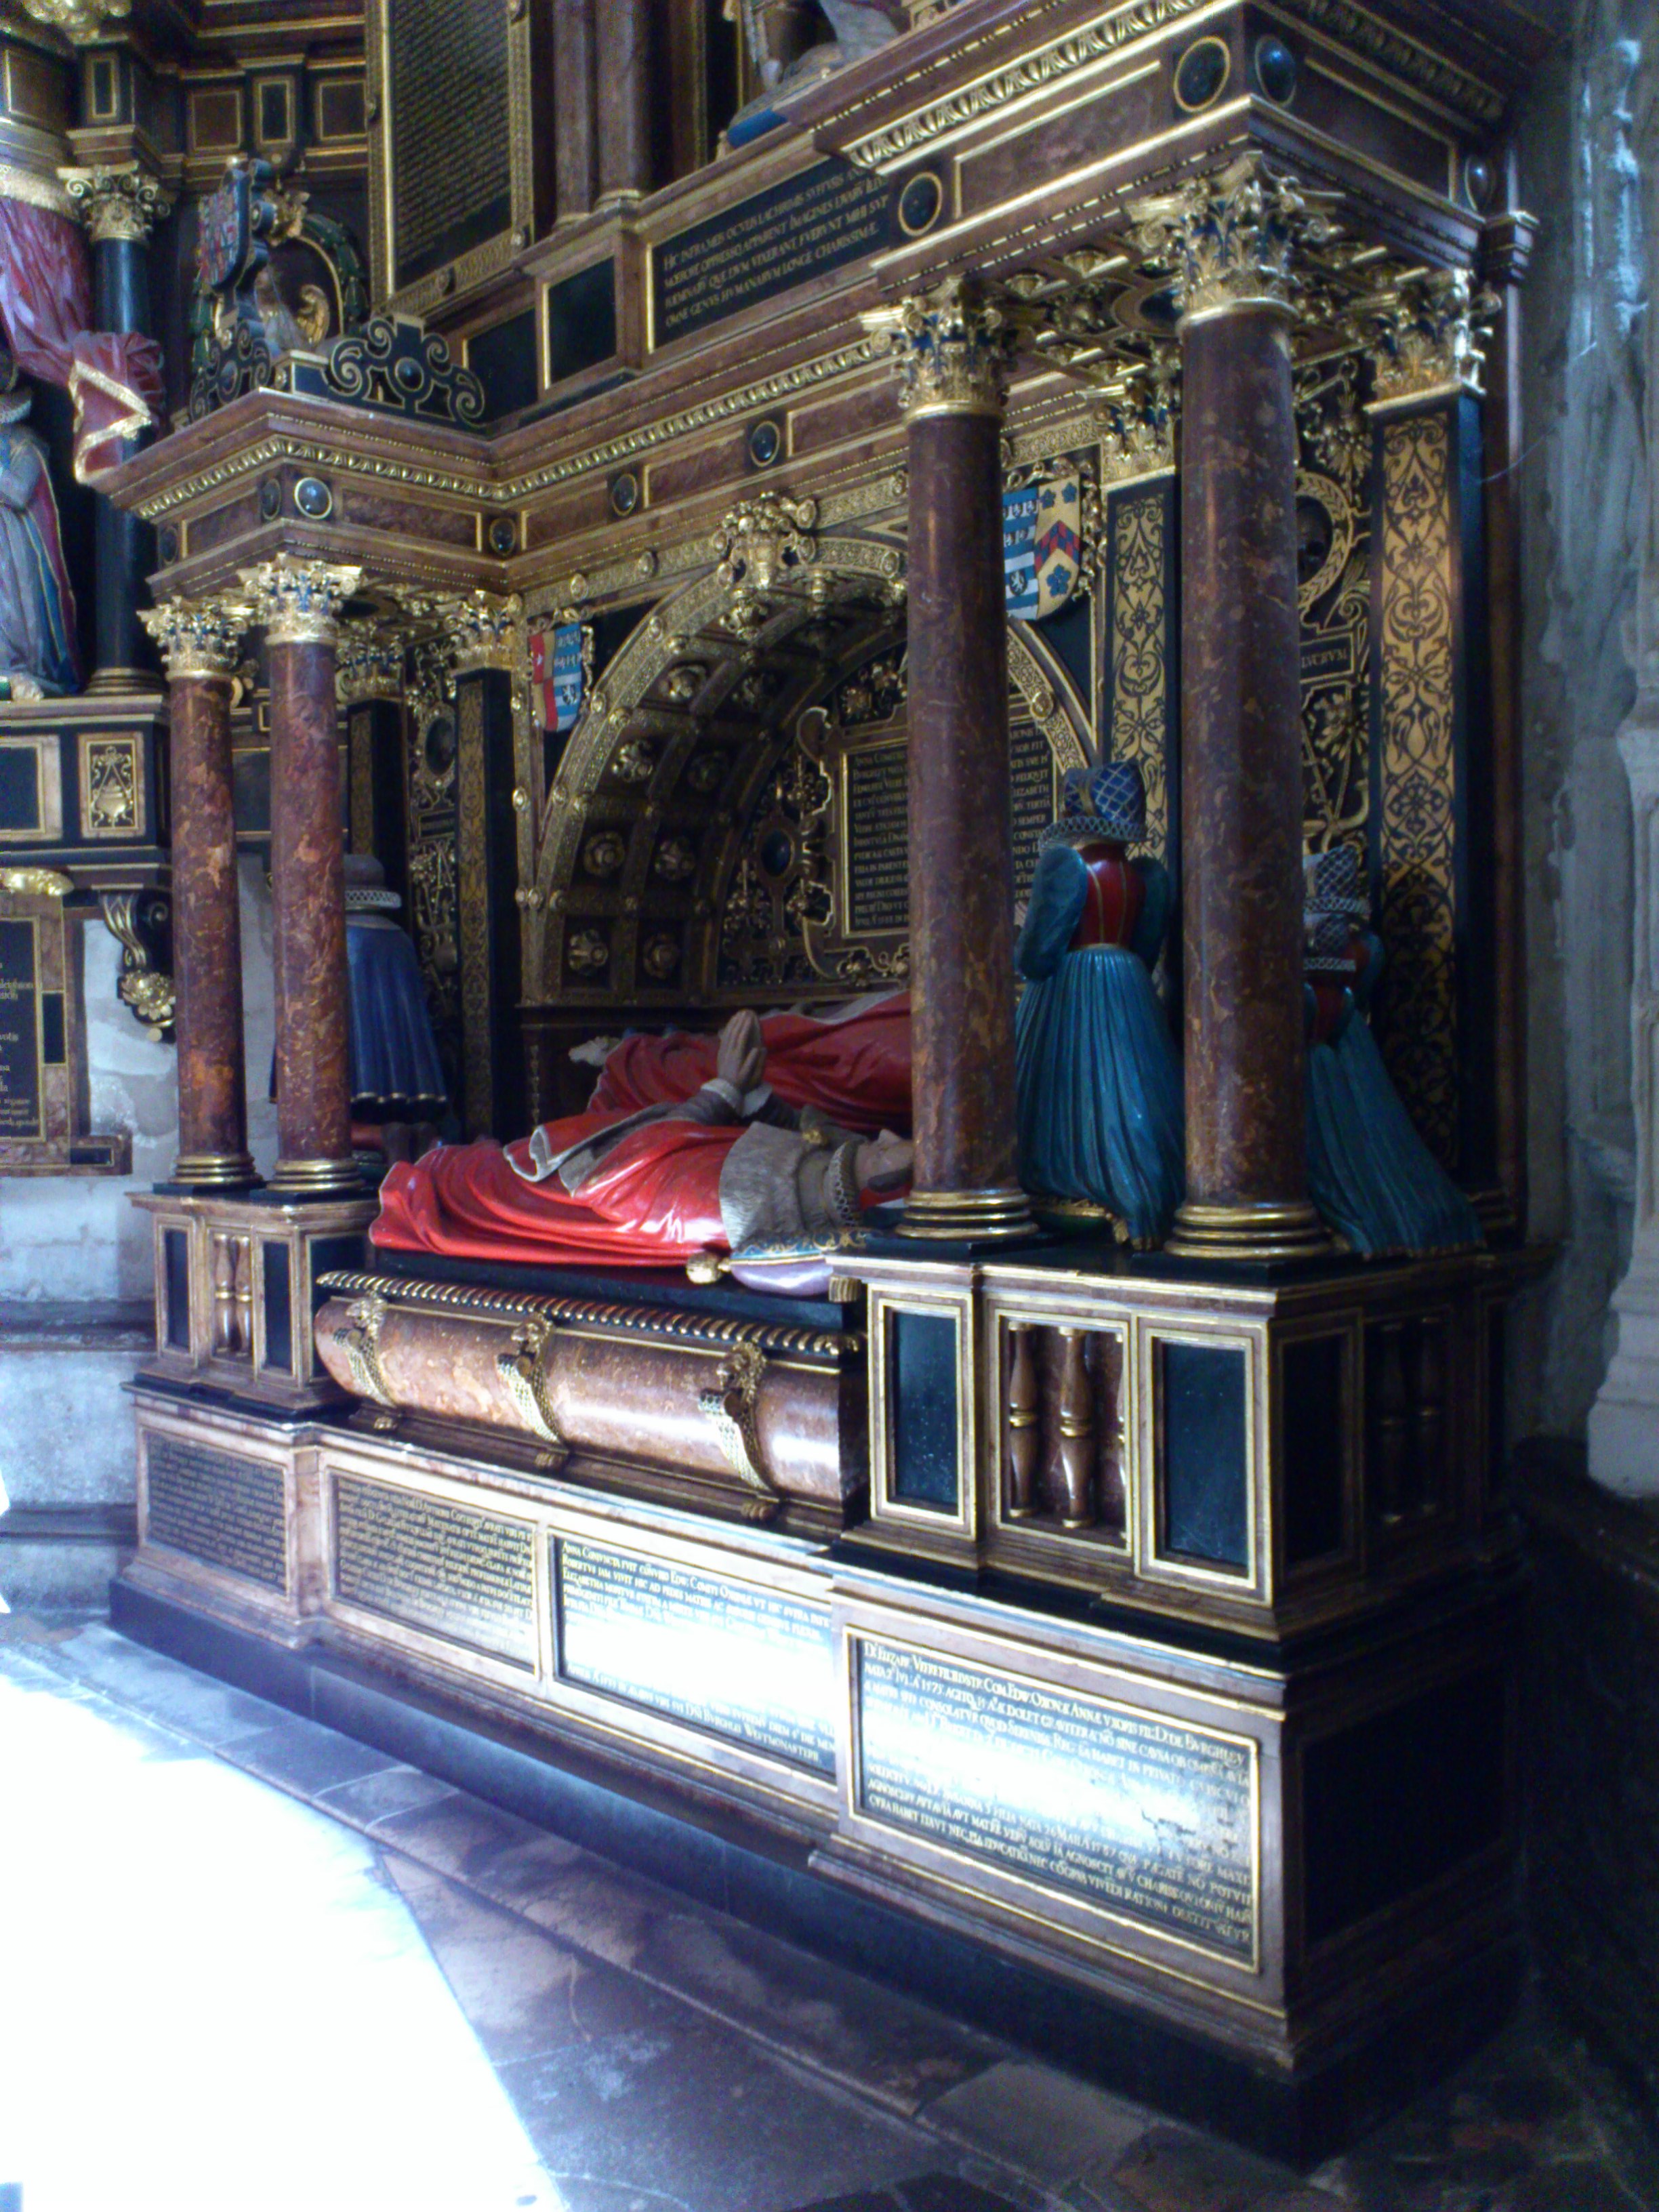 Cecil tomb at Westminster Abbey